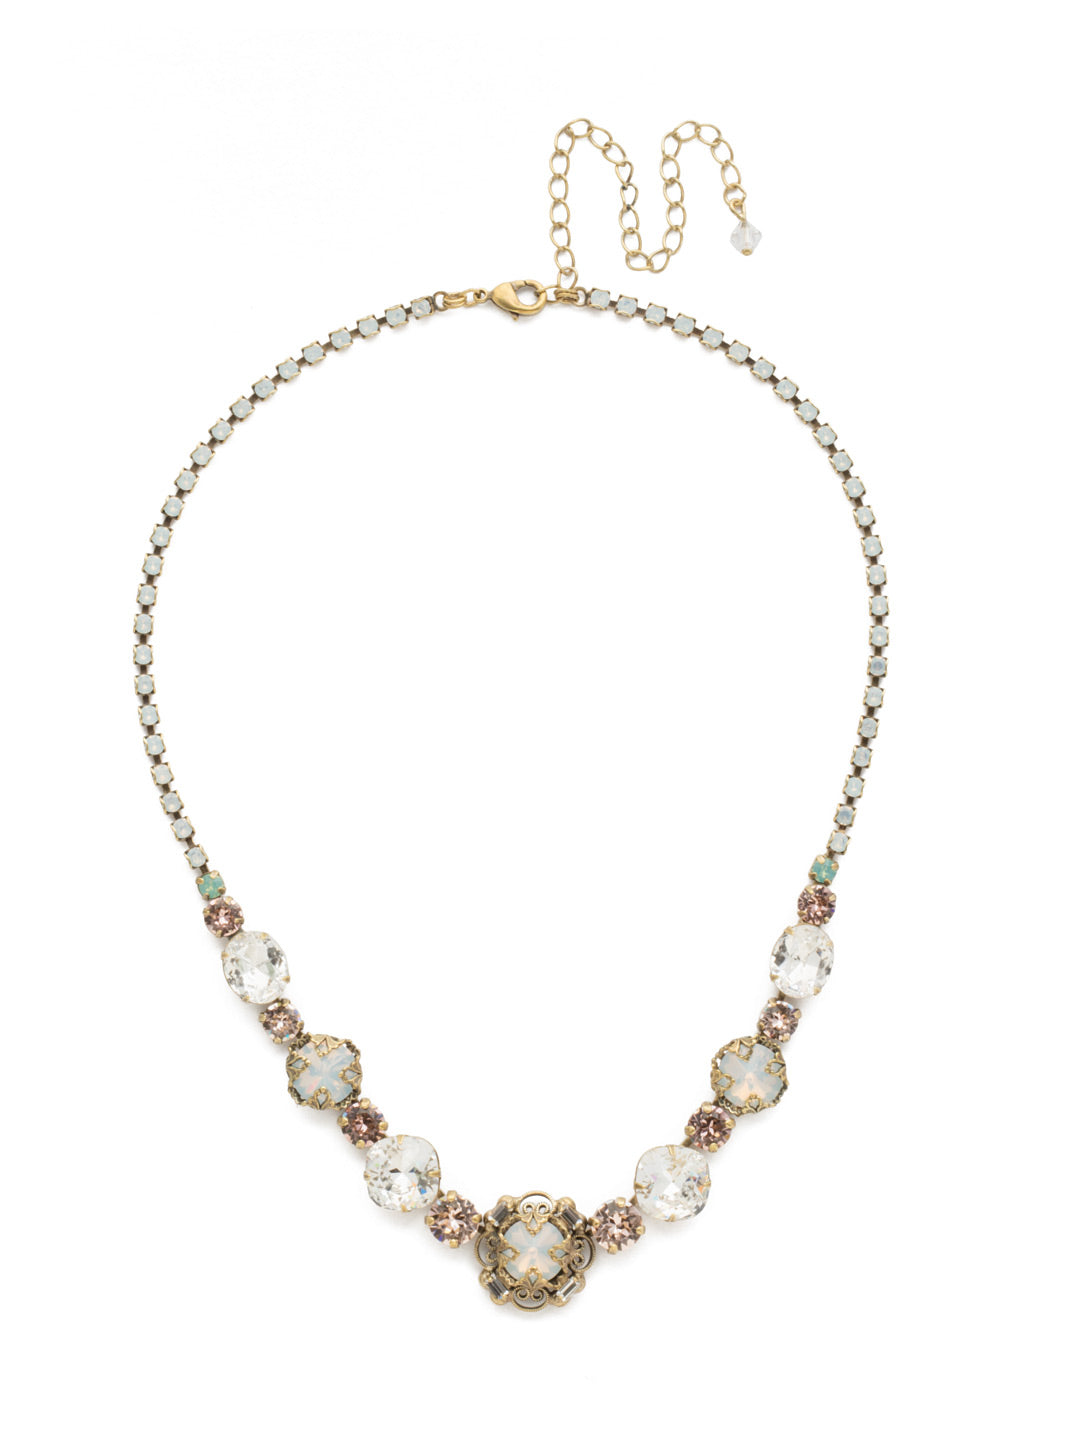 Echeveria Tennis Necklace - NDU17AGWMA - This style spotlights a link of cushion, round, and oval crystals in various sizes completed by a ball and chain clasp. From Sorrelli's White Magnolia collection in our Antique Gold-tone finish.